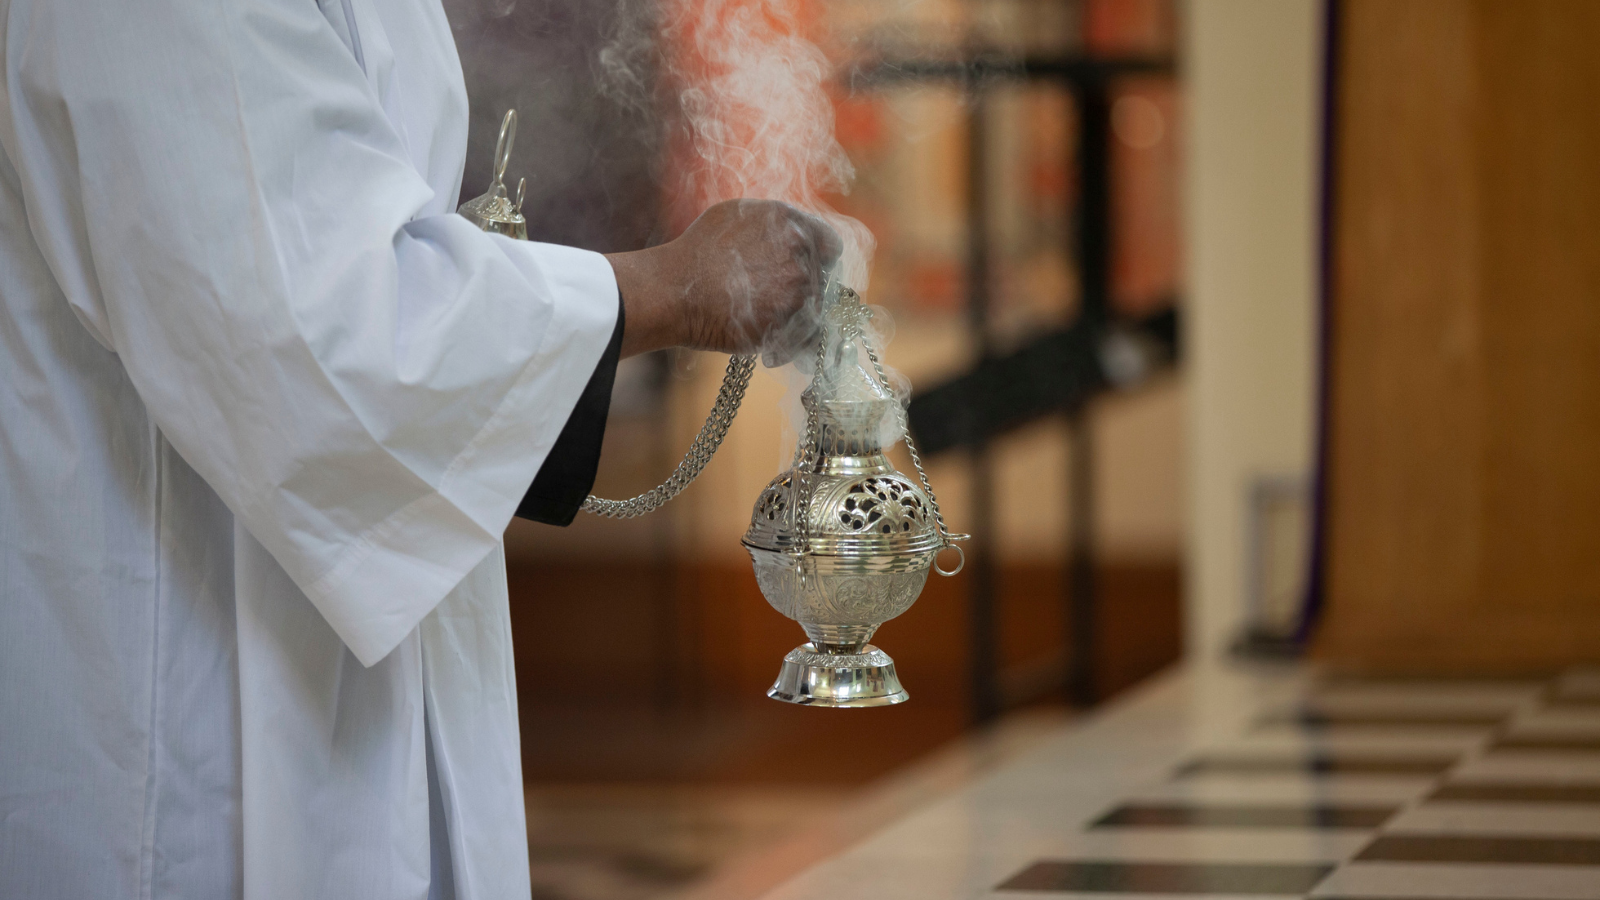 Priest holding container of incense